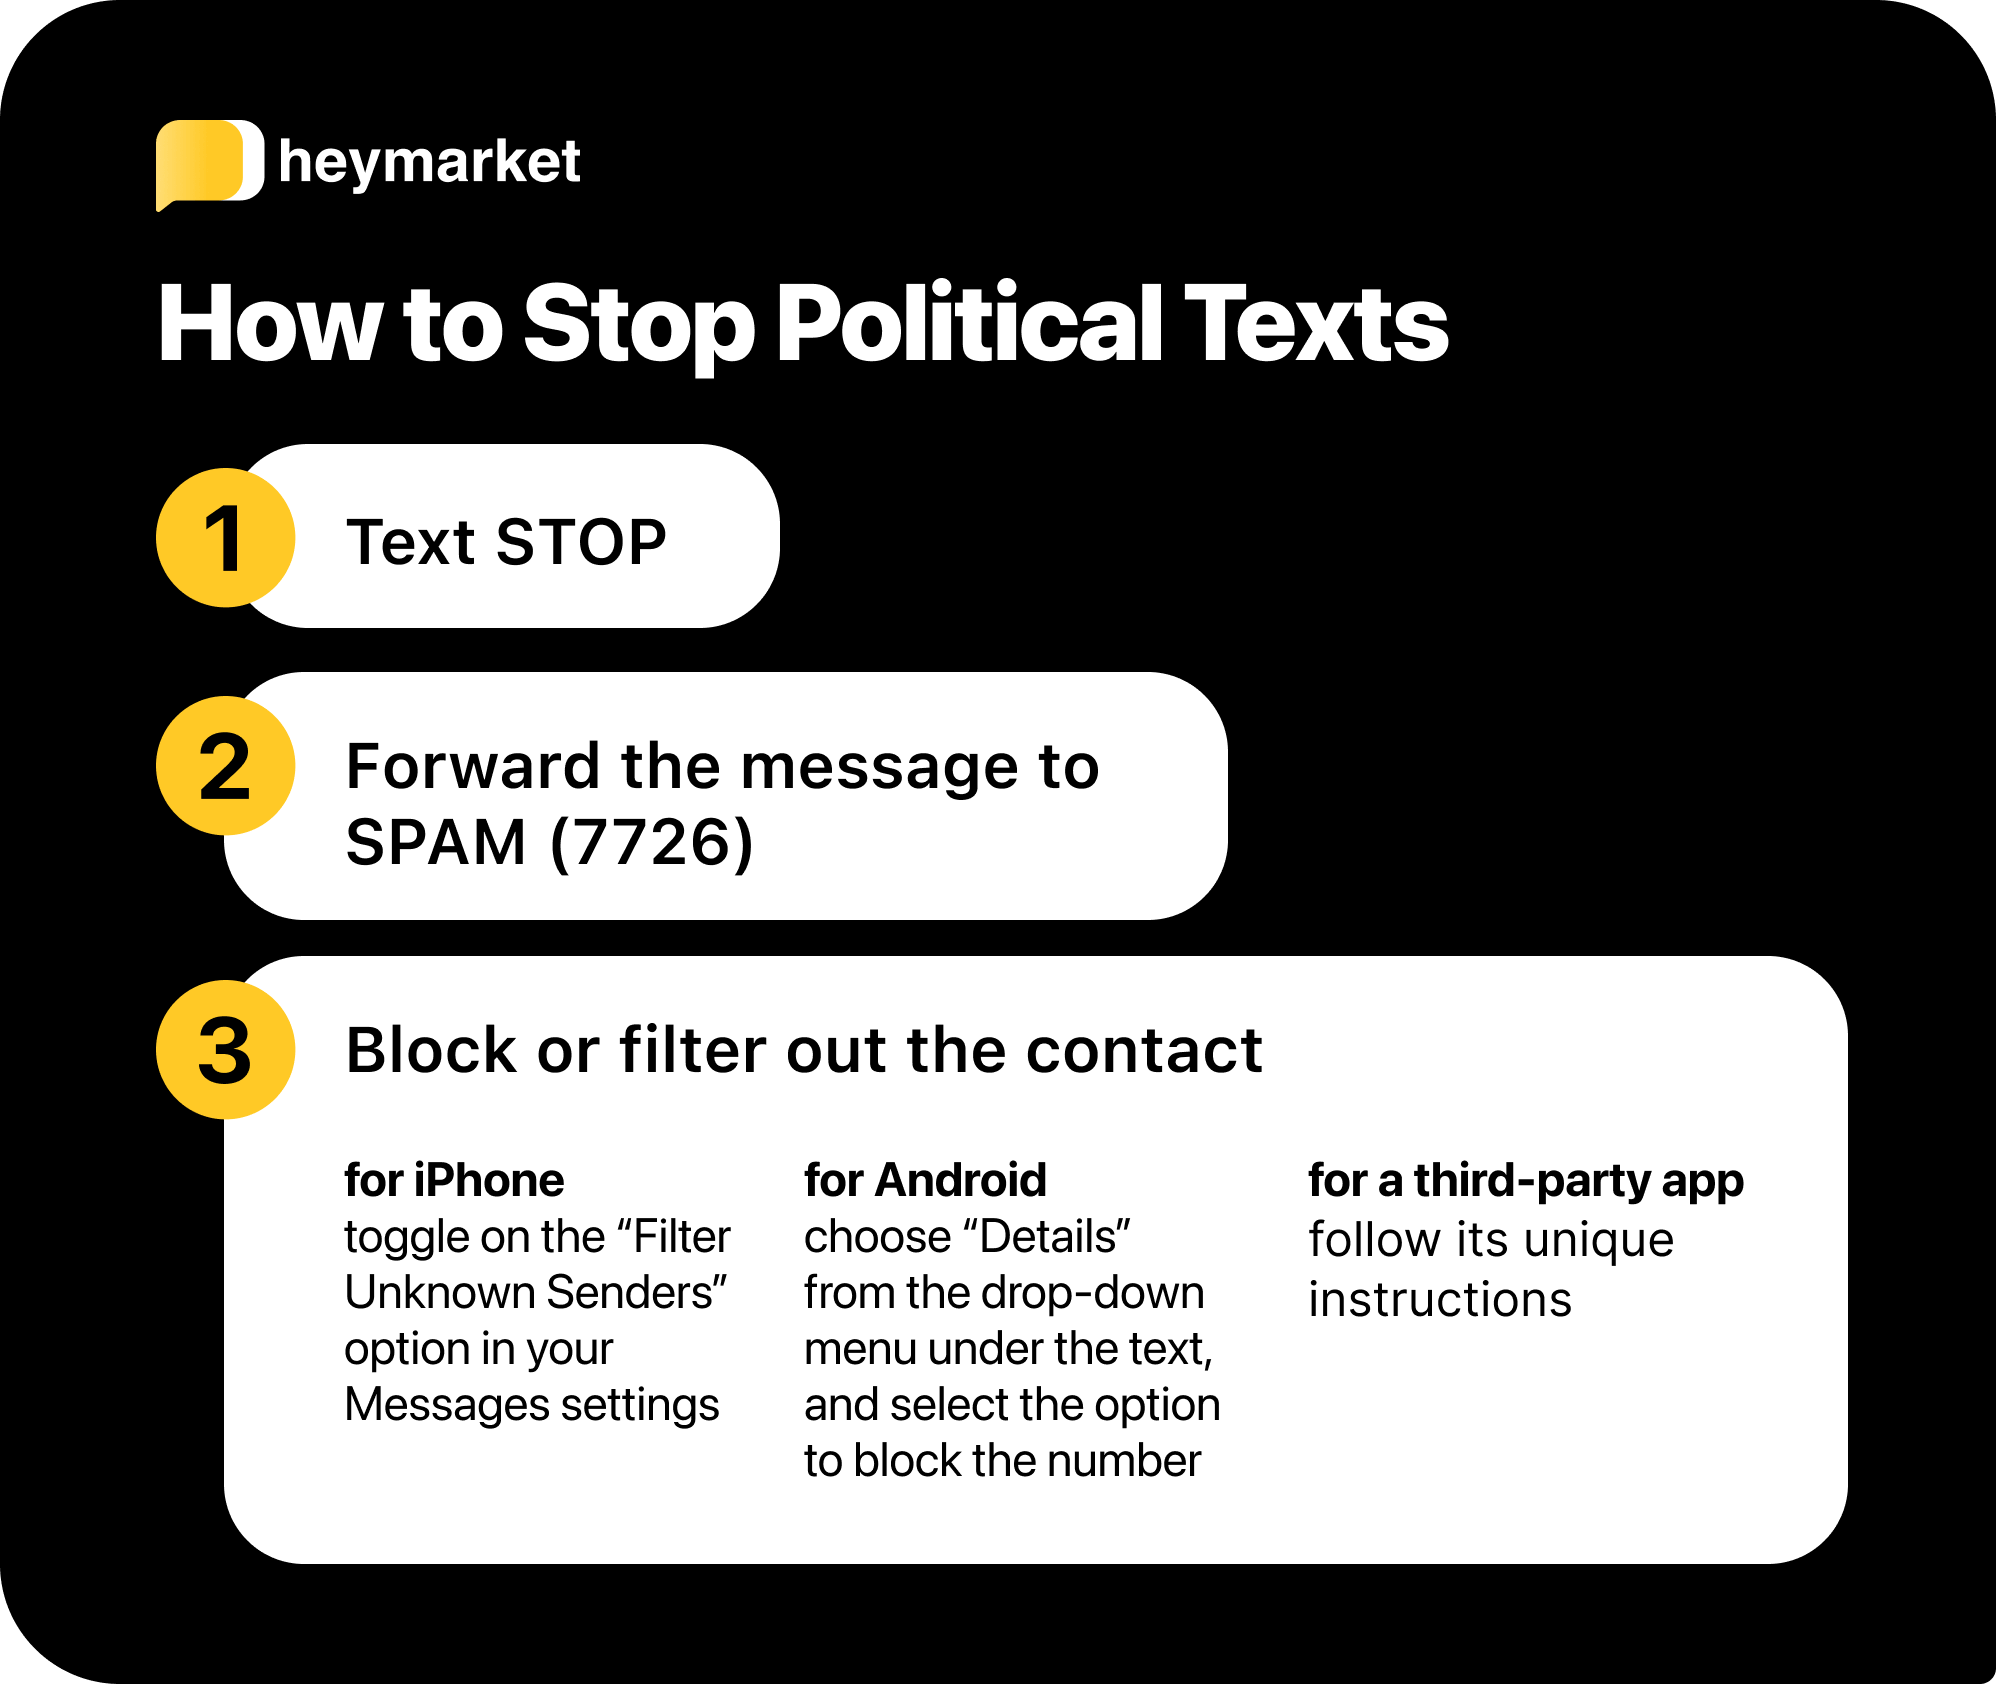 How to stop political texts